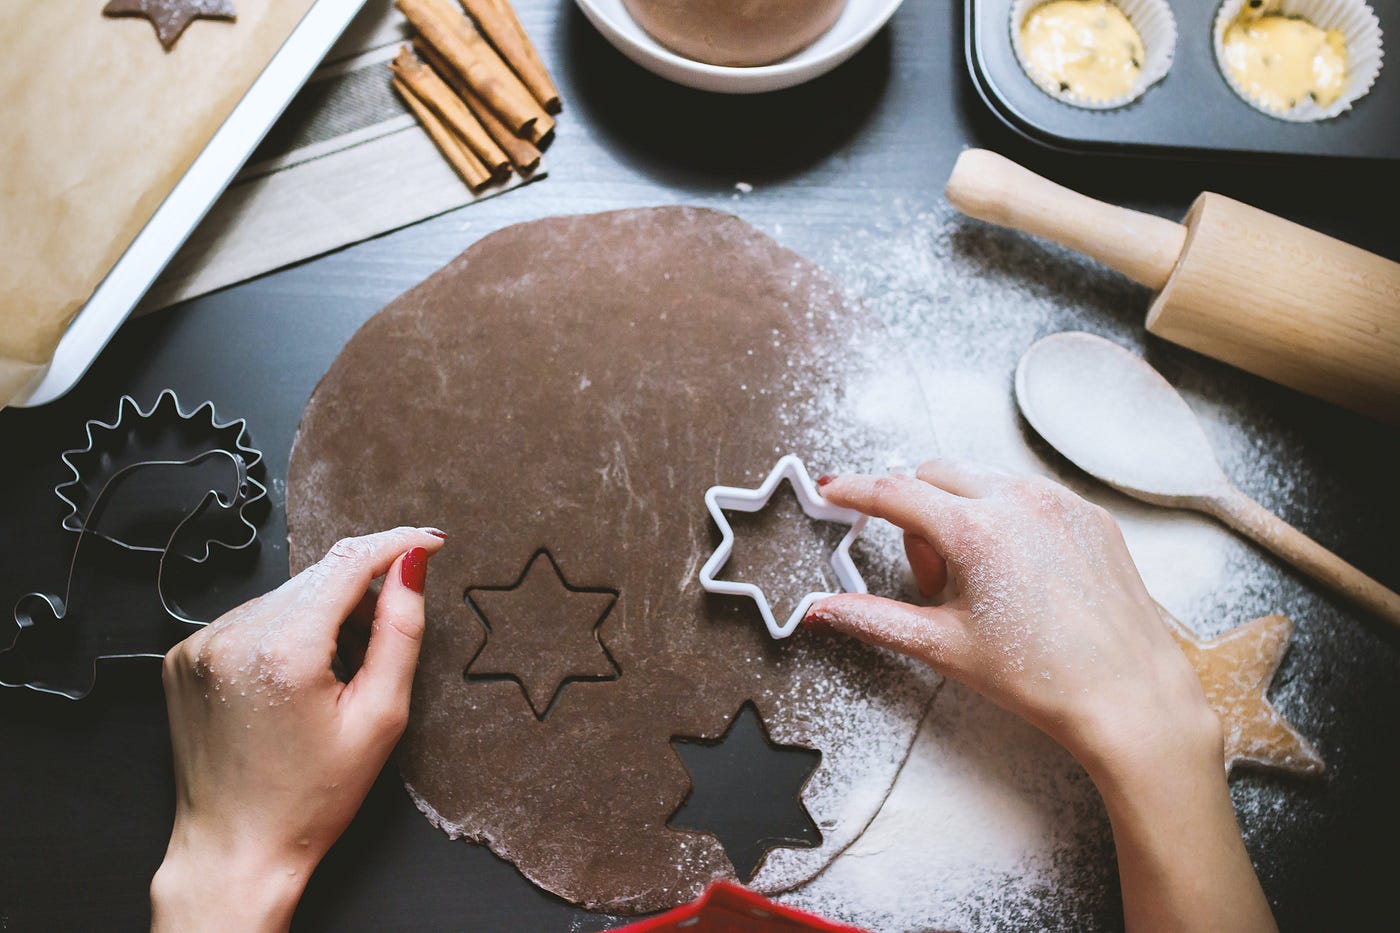 A person’s hands pressing star-shaped cookie cutters into chocolate cookie dough, with a rolling pin, scattered flour, and additional baking utensils in the background.